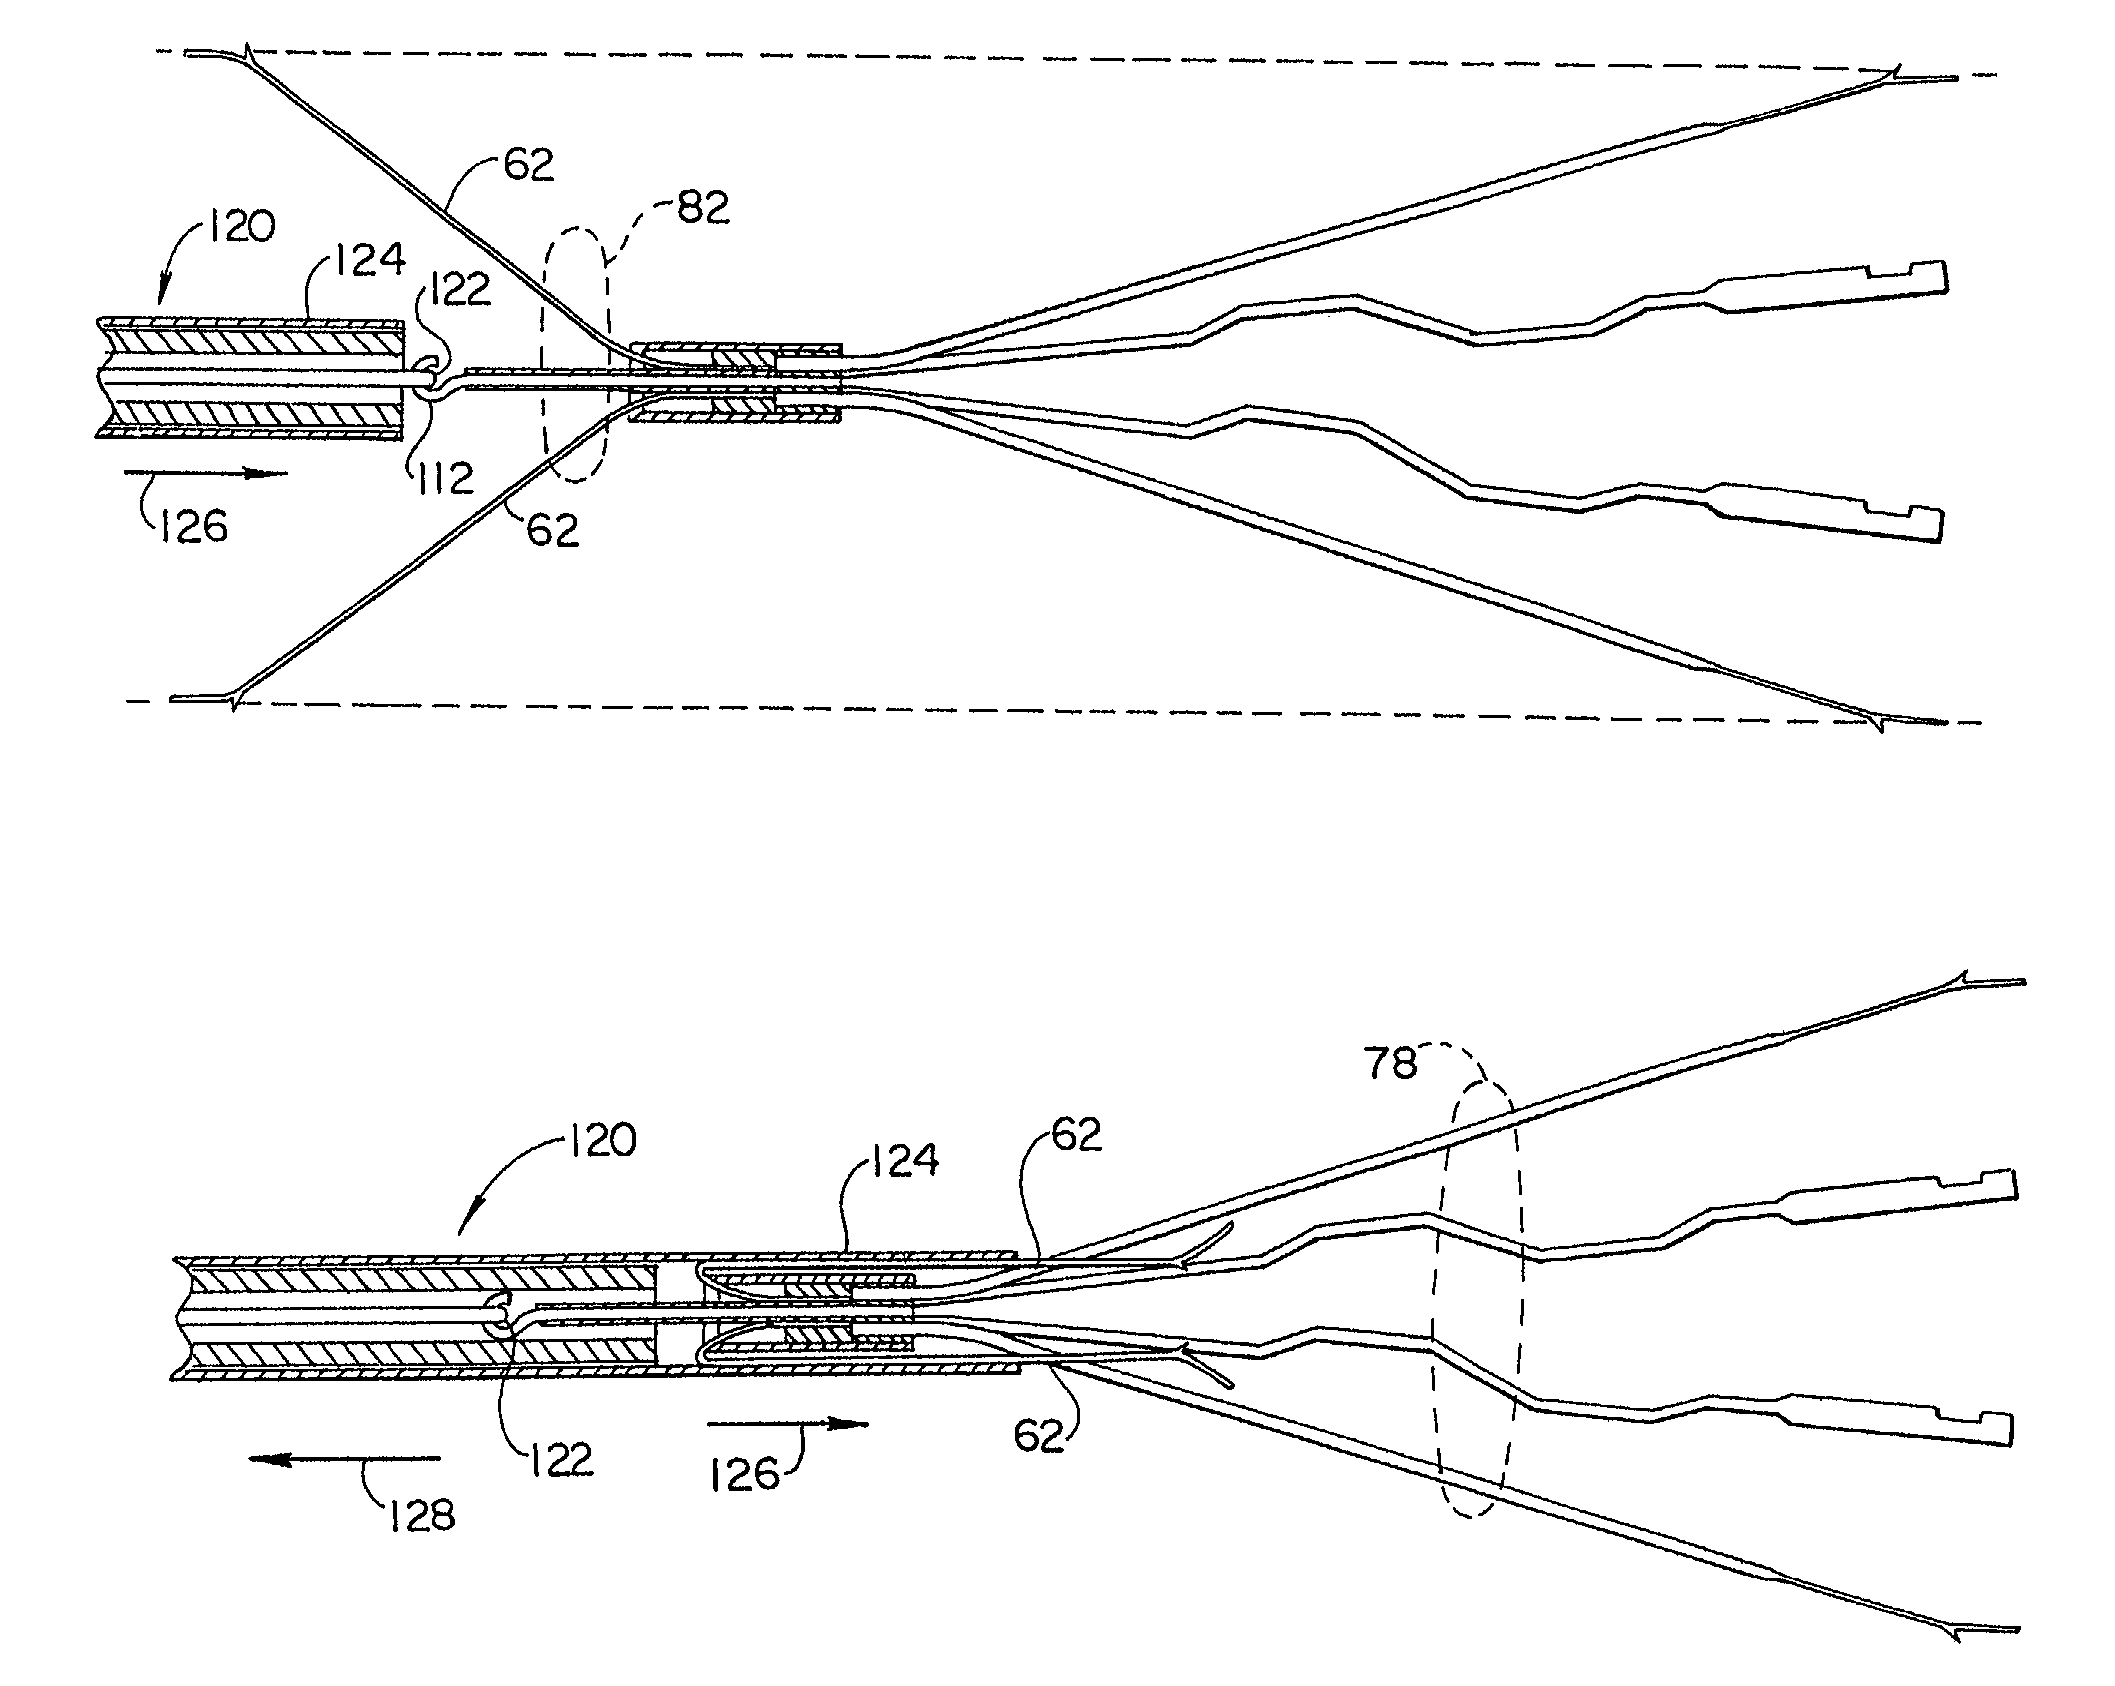 Atraumatic anchoring and disengagement mechanism for permanent implant device